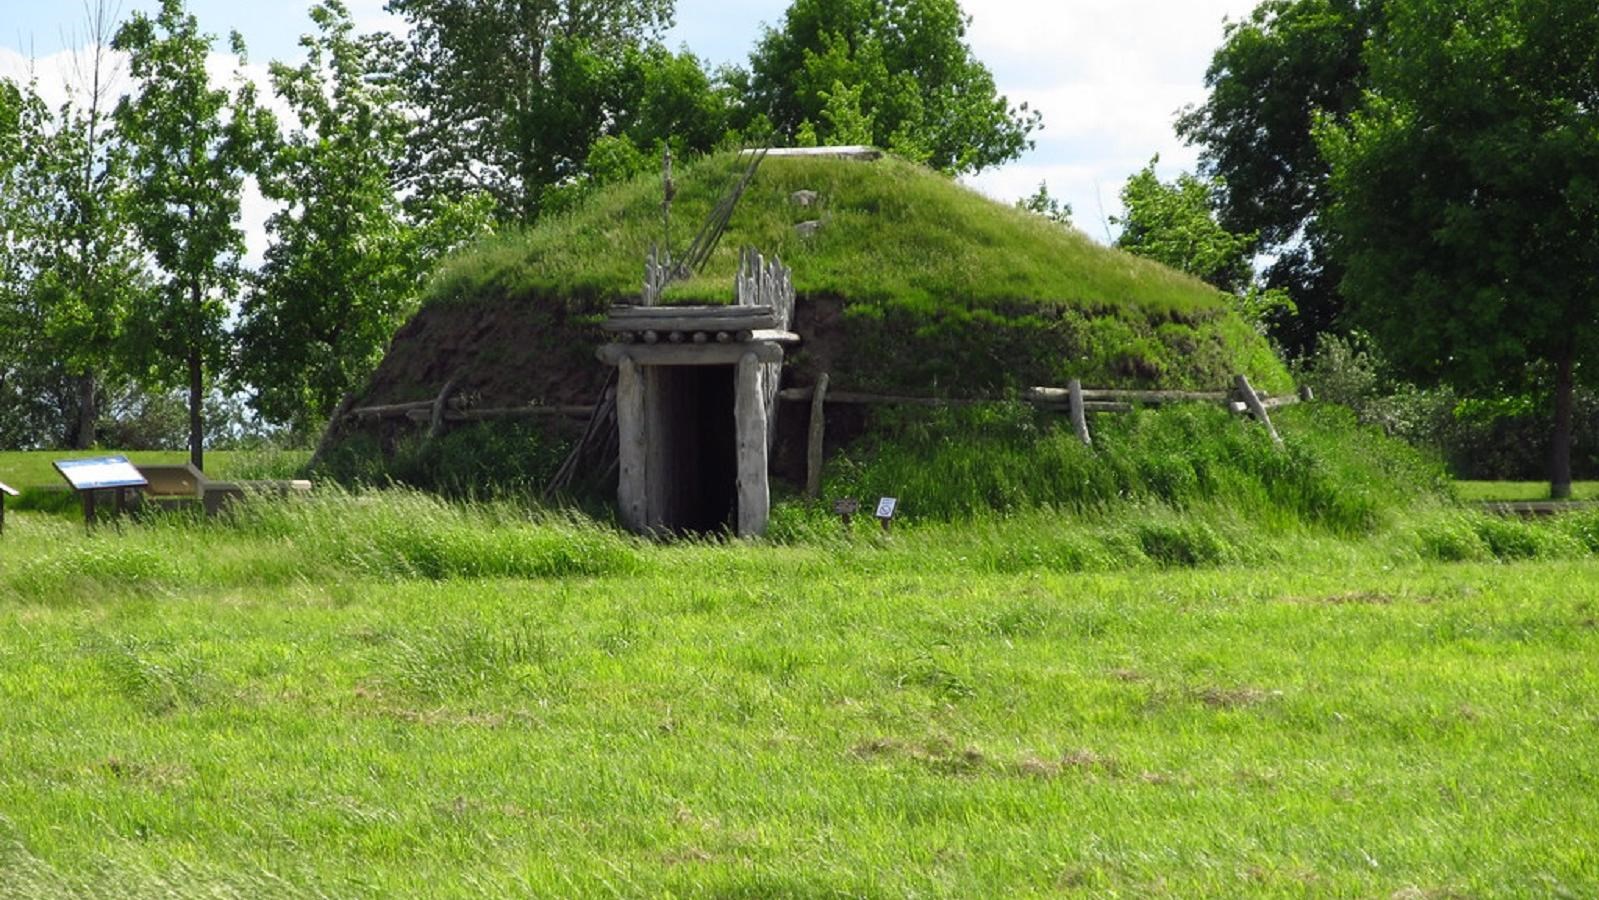 A large dome-shaped earth structure covered in green grass